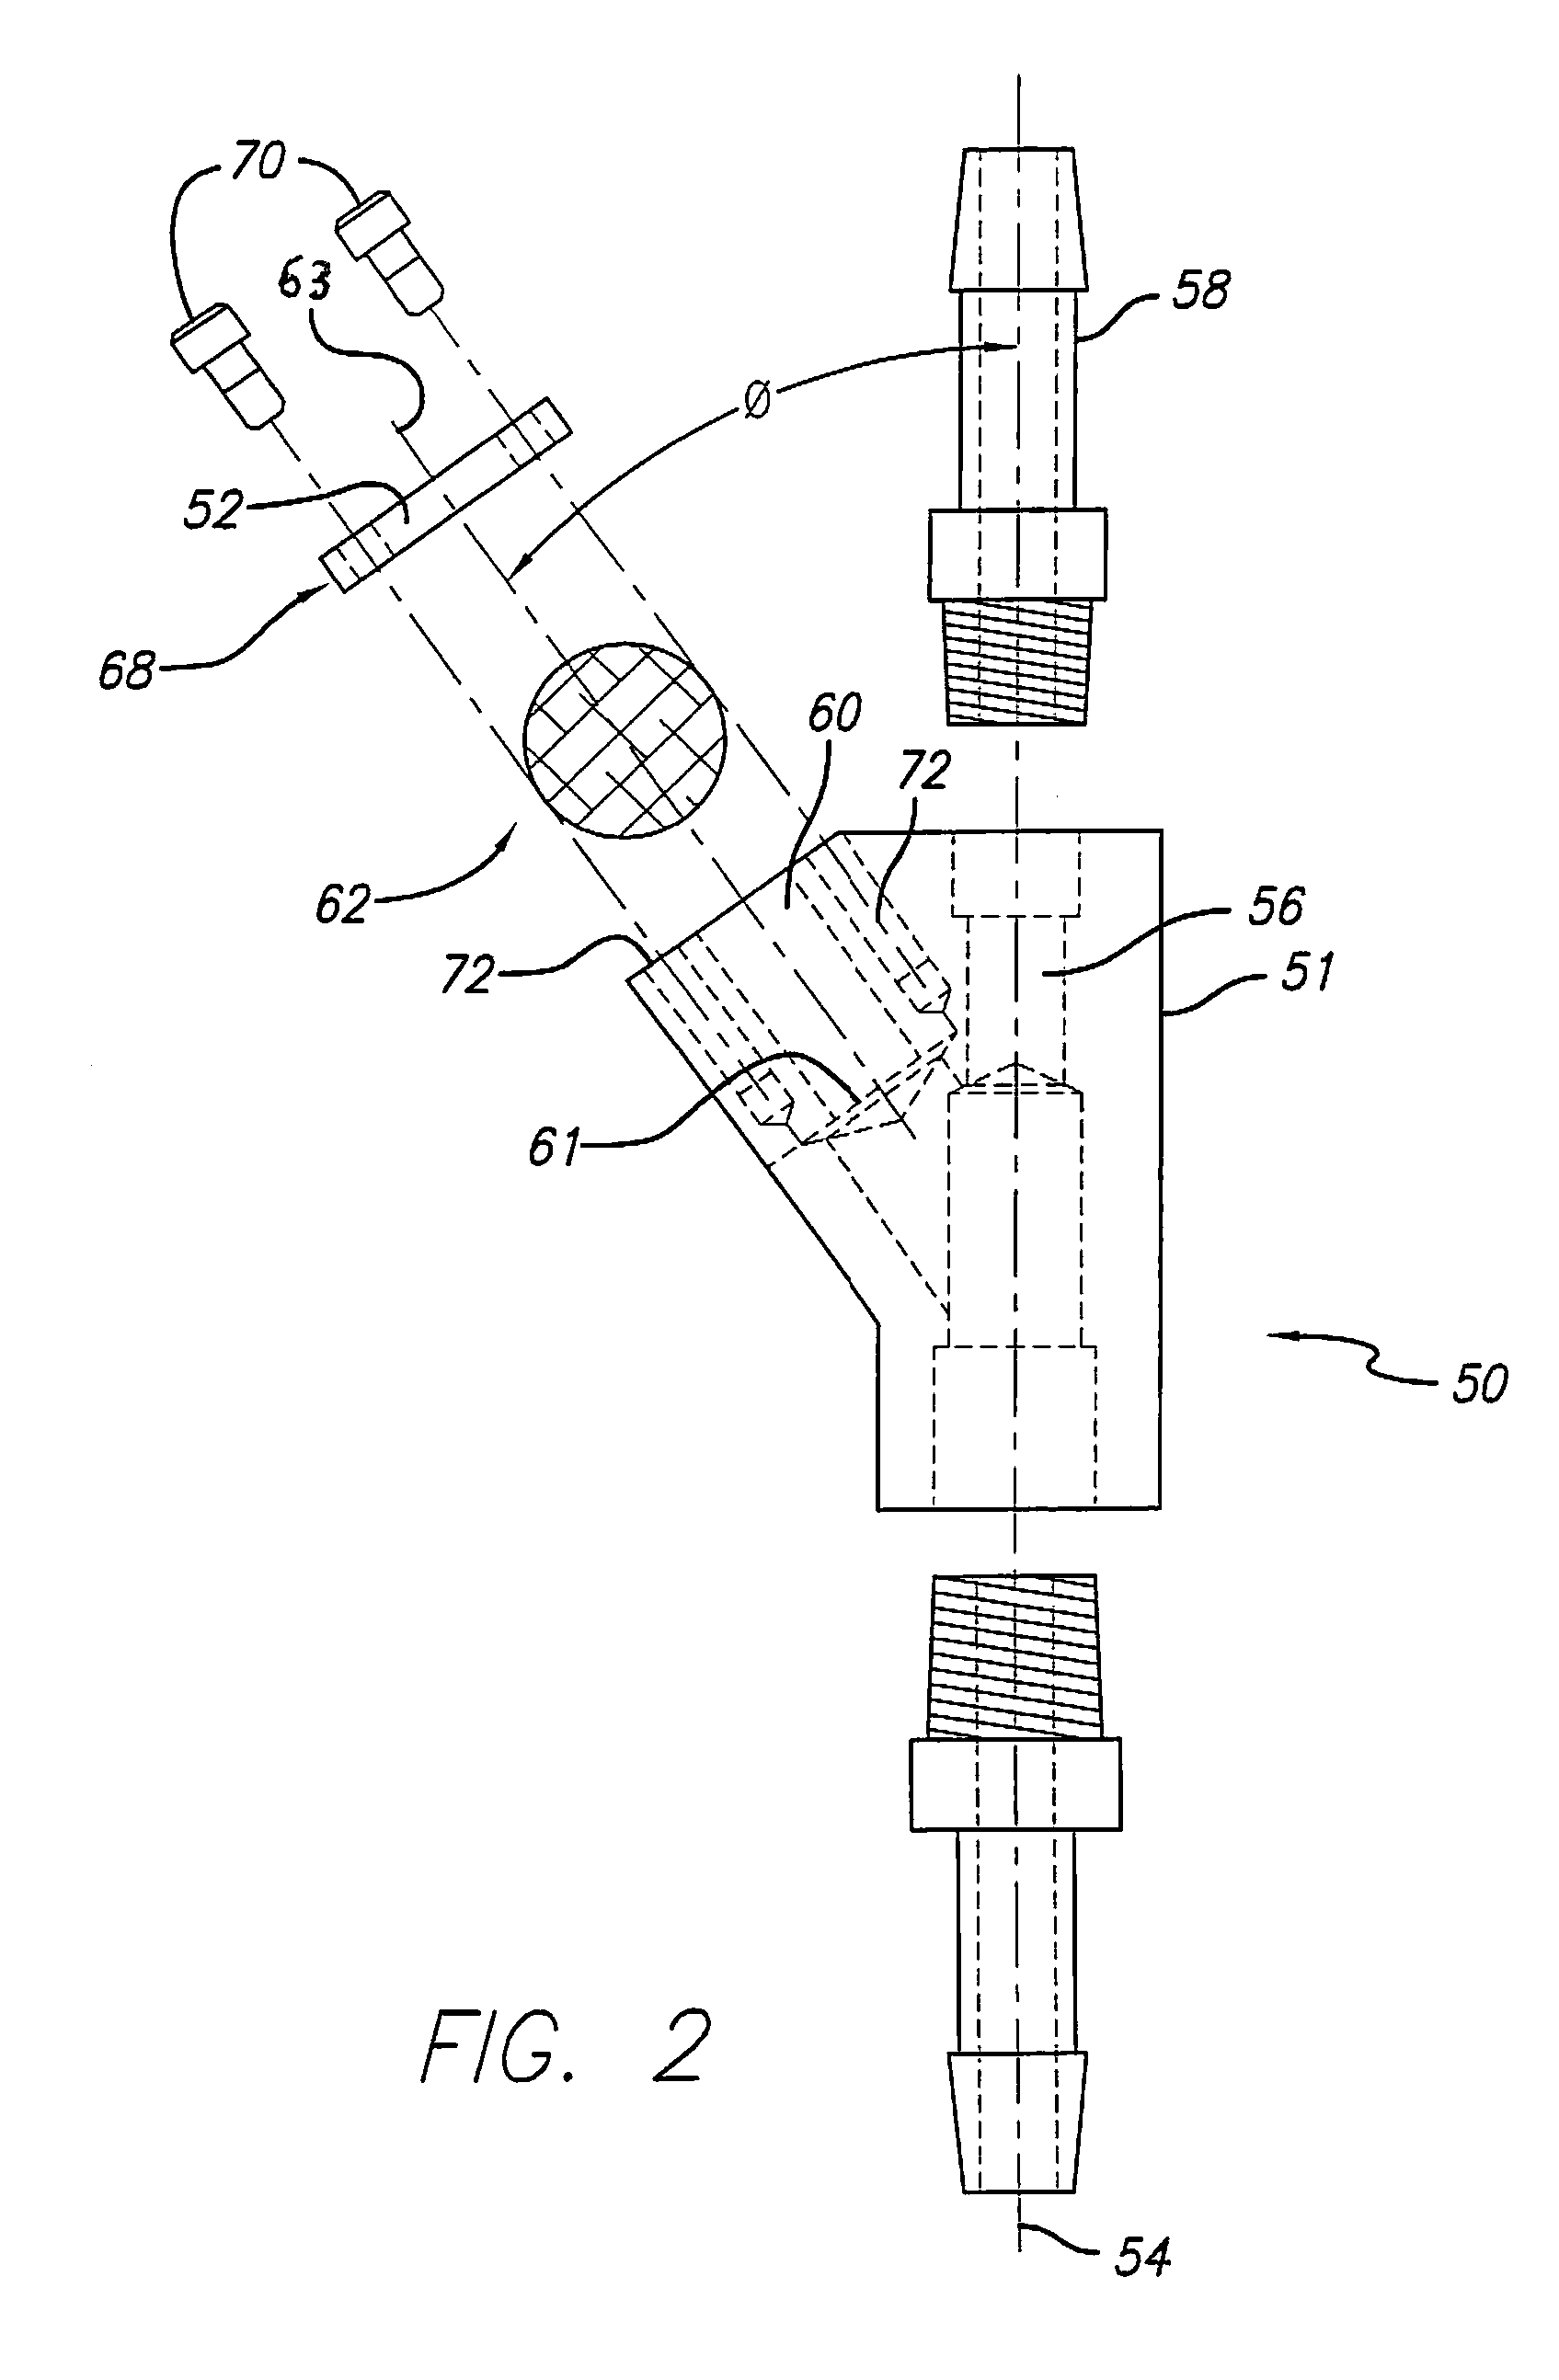 Abrasivejet cutting head with back-flow prevention valve